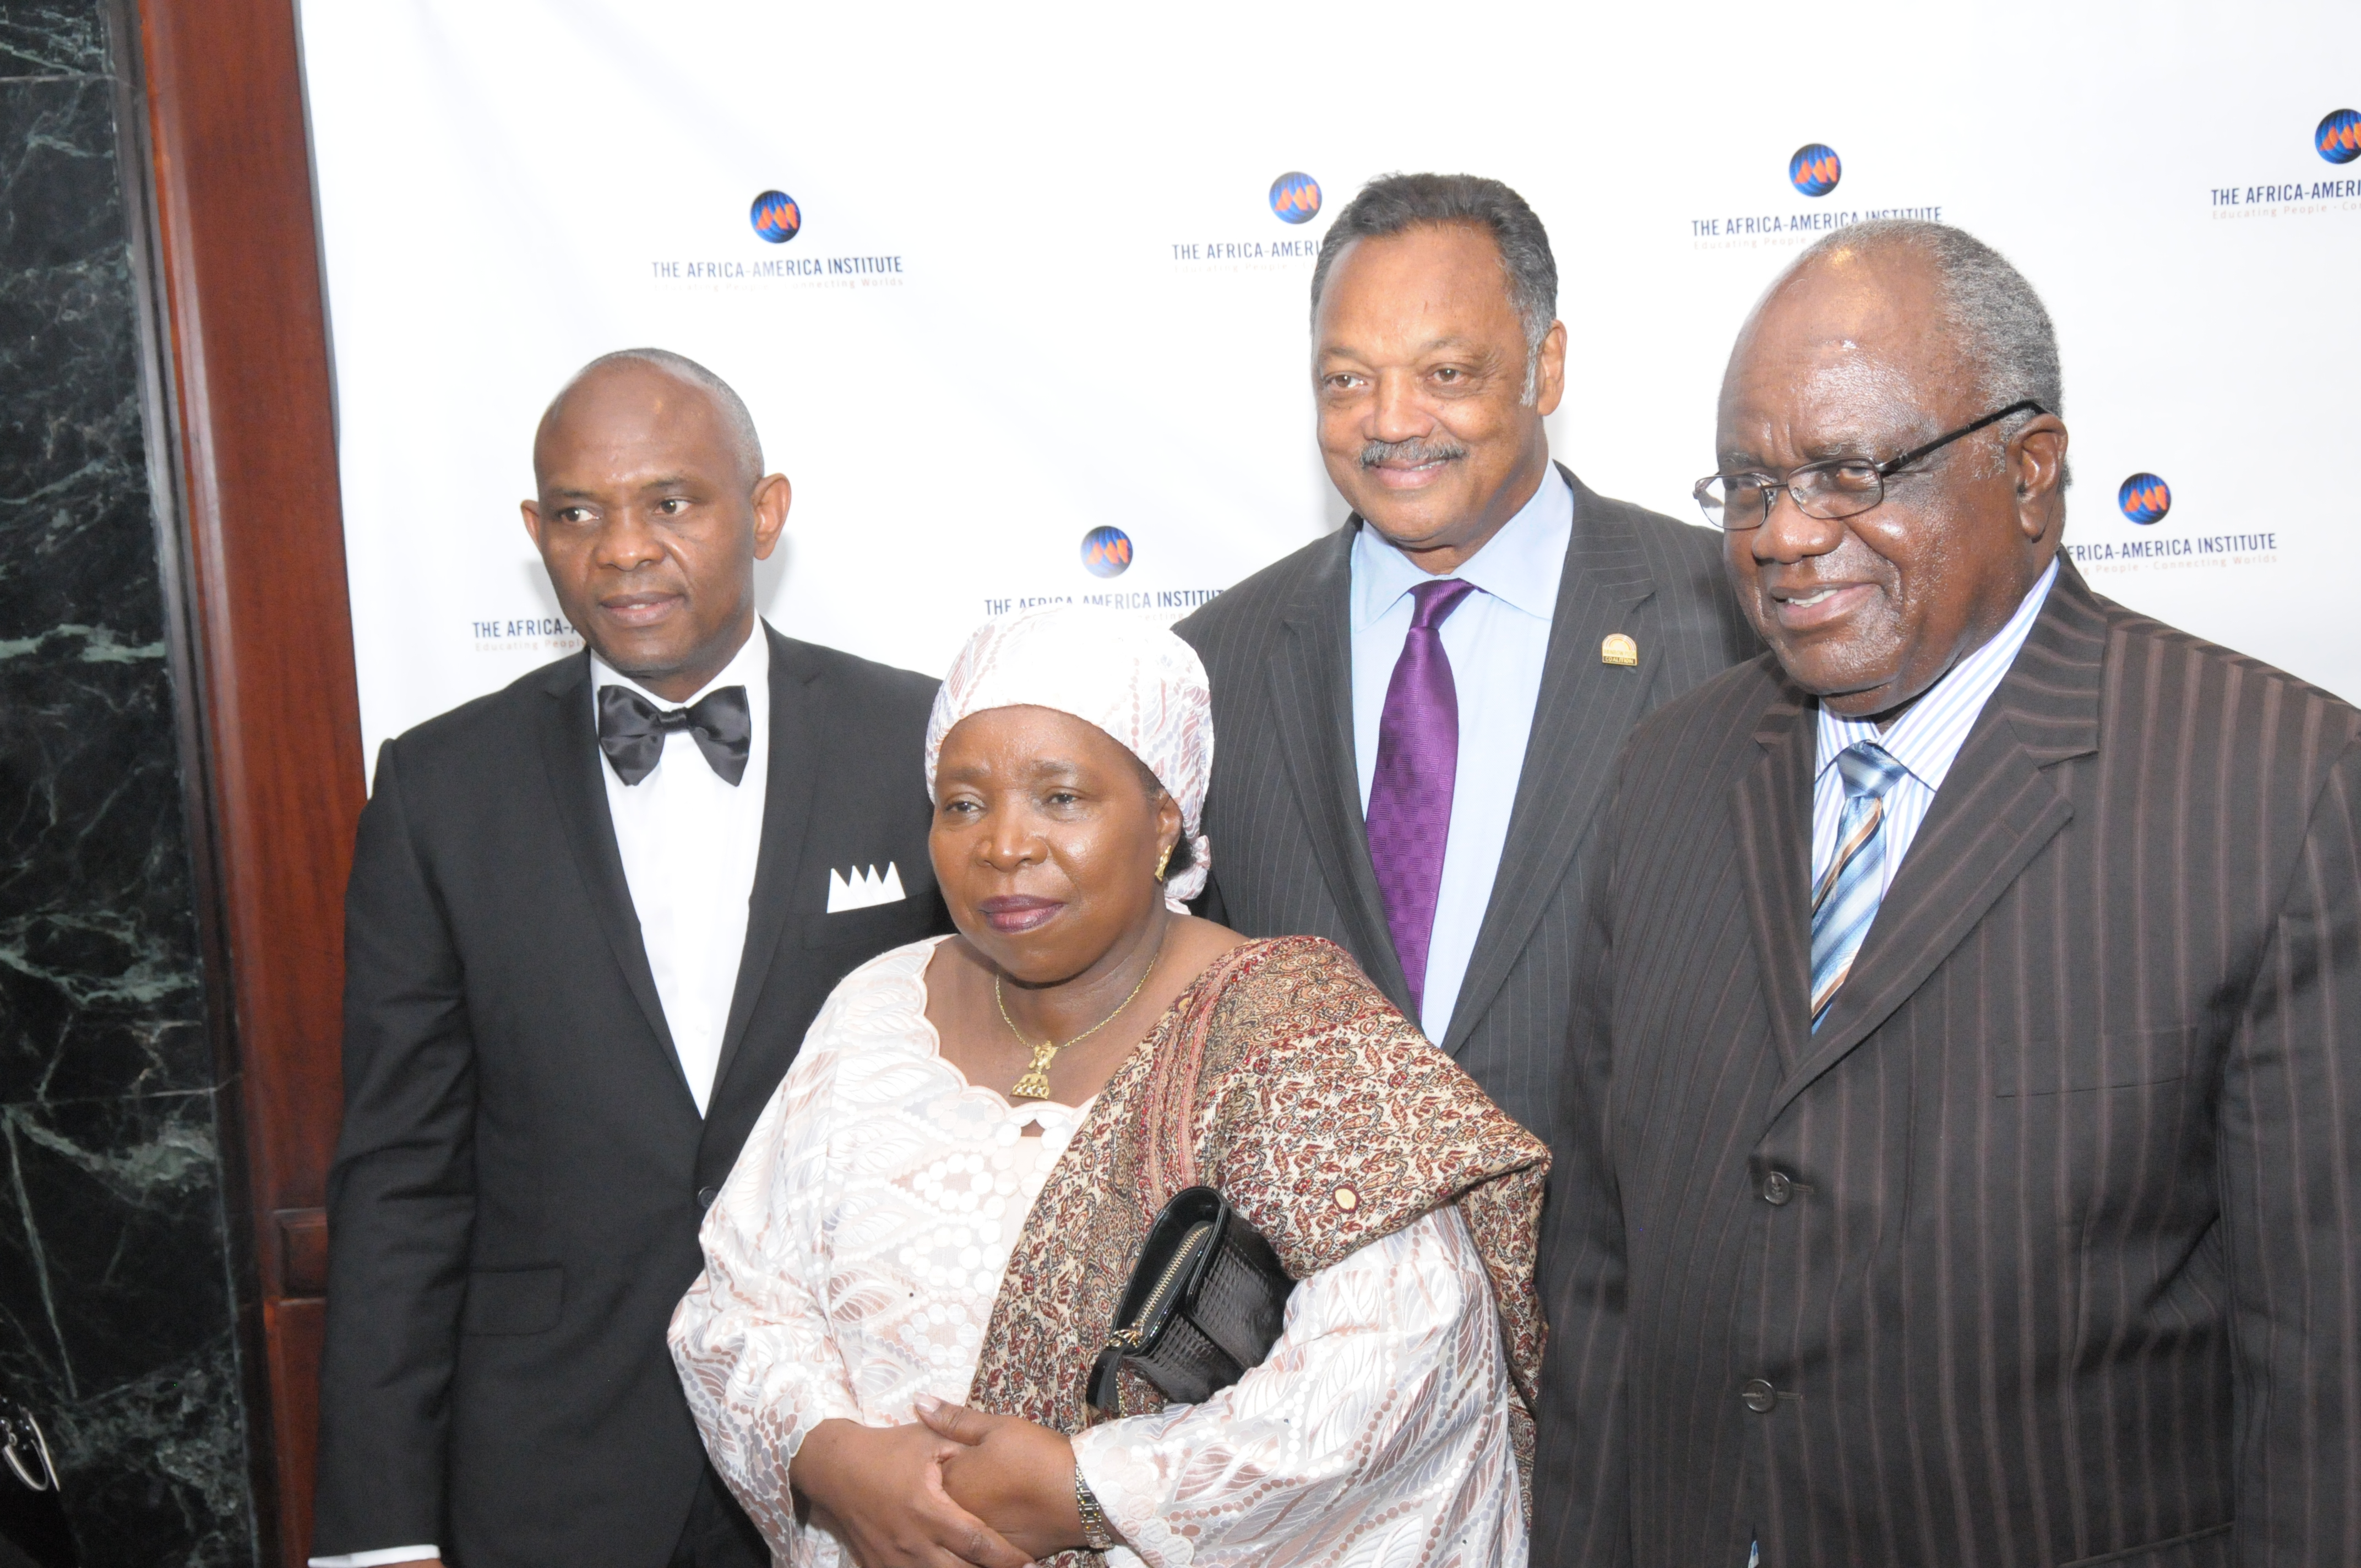 The Africa America Institute's 60th Anniversary Awards Gala honorees and special guests.